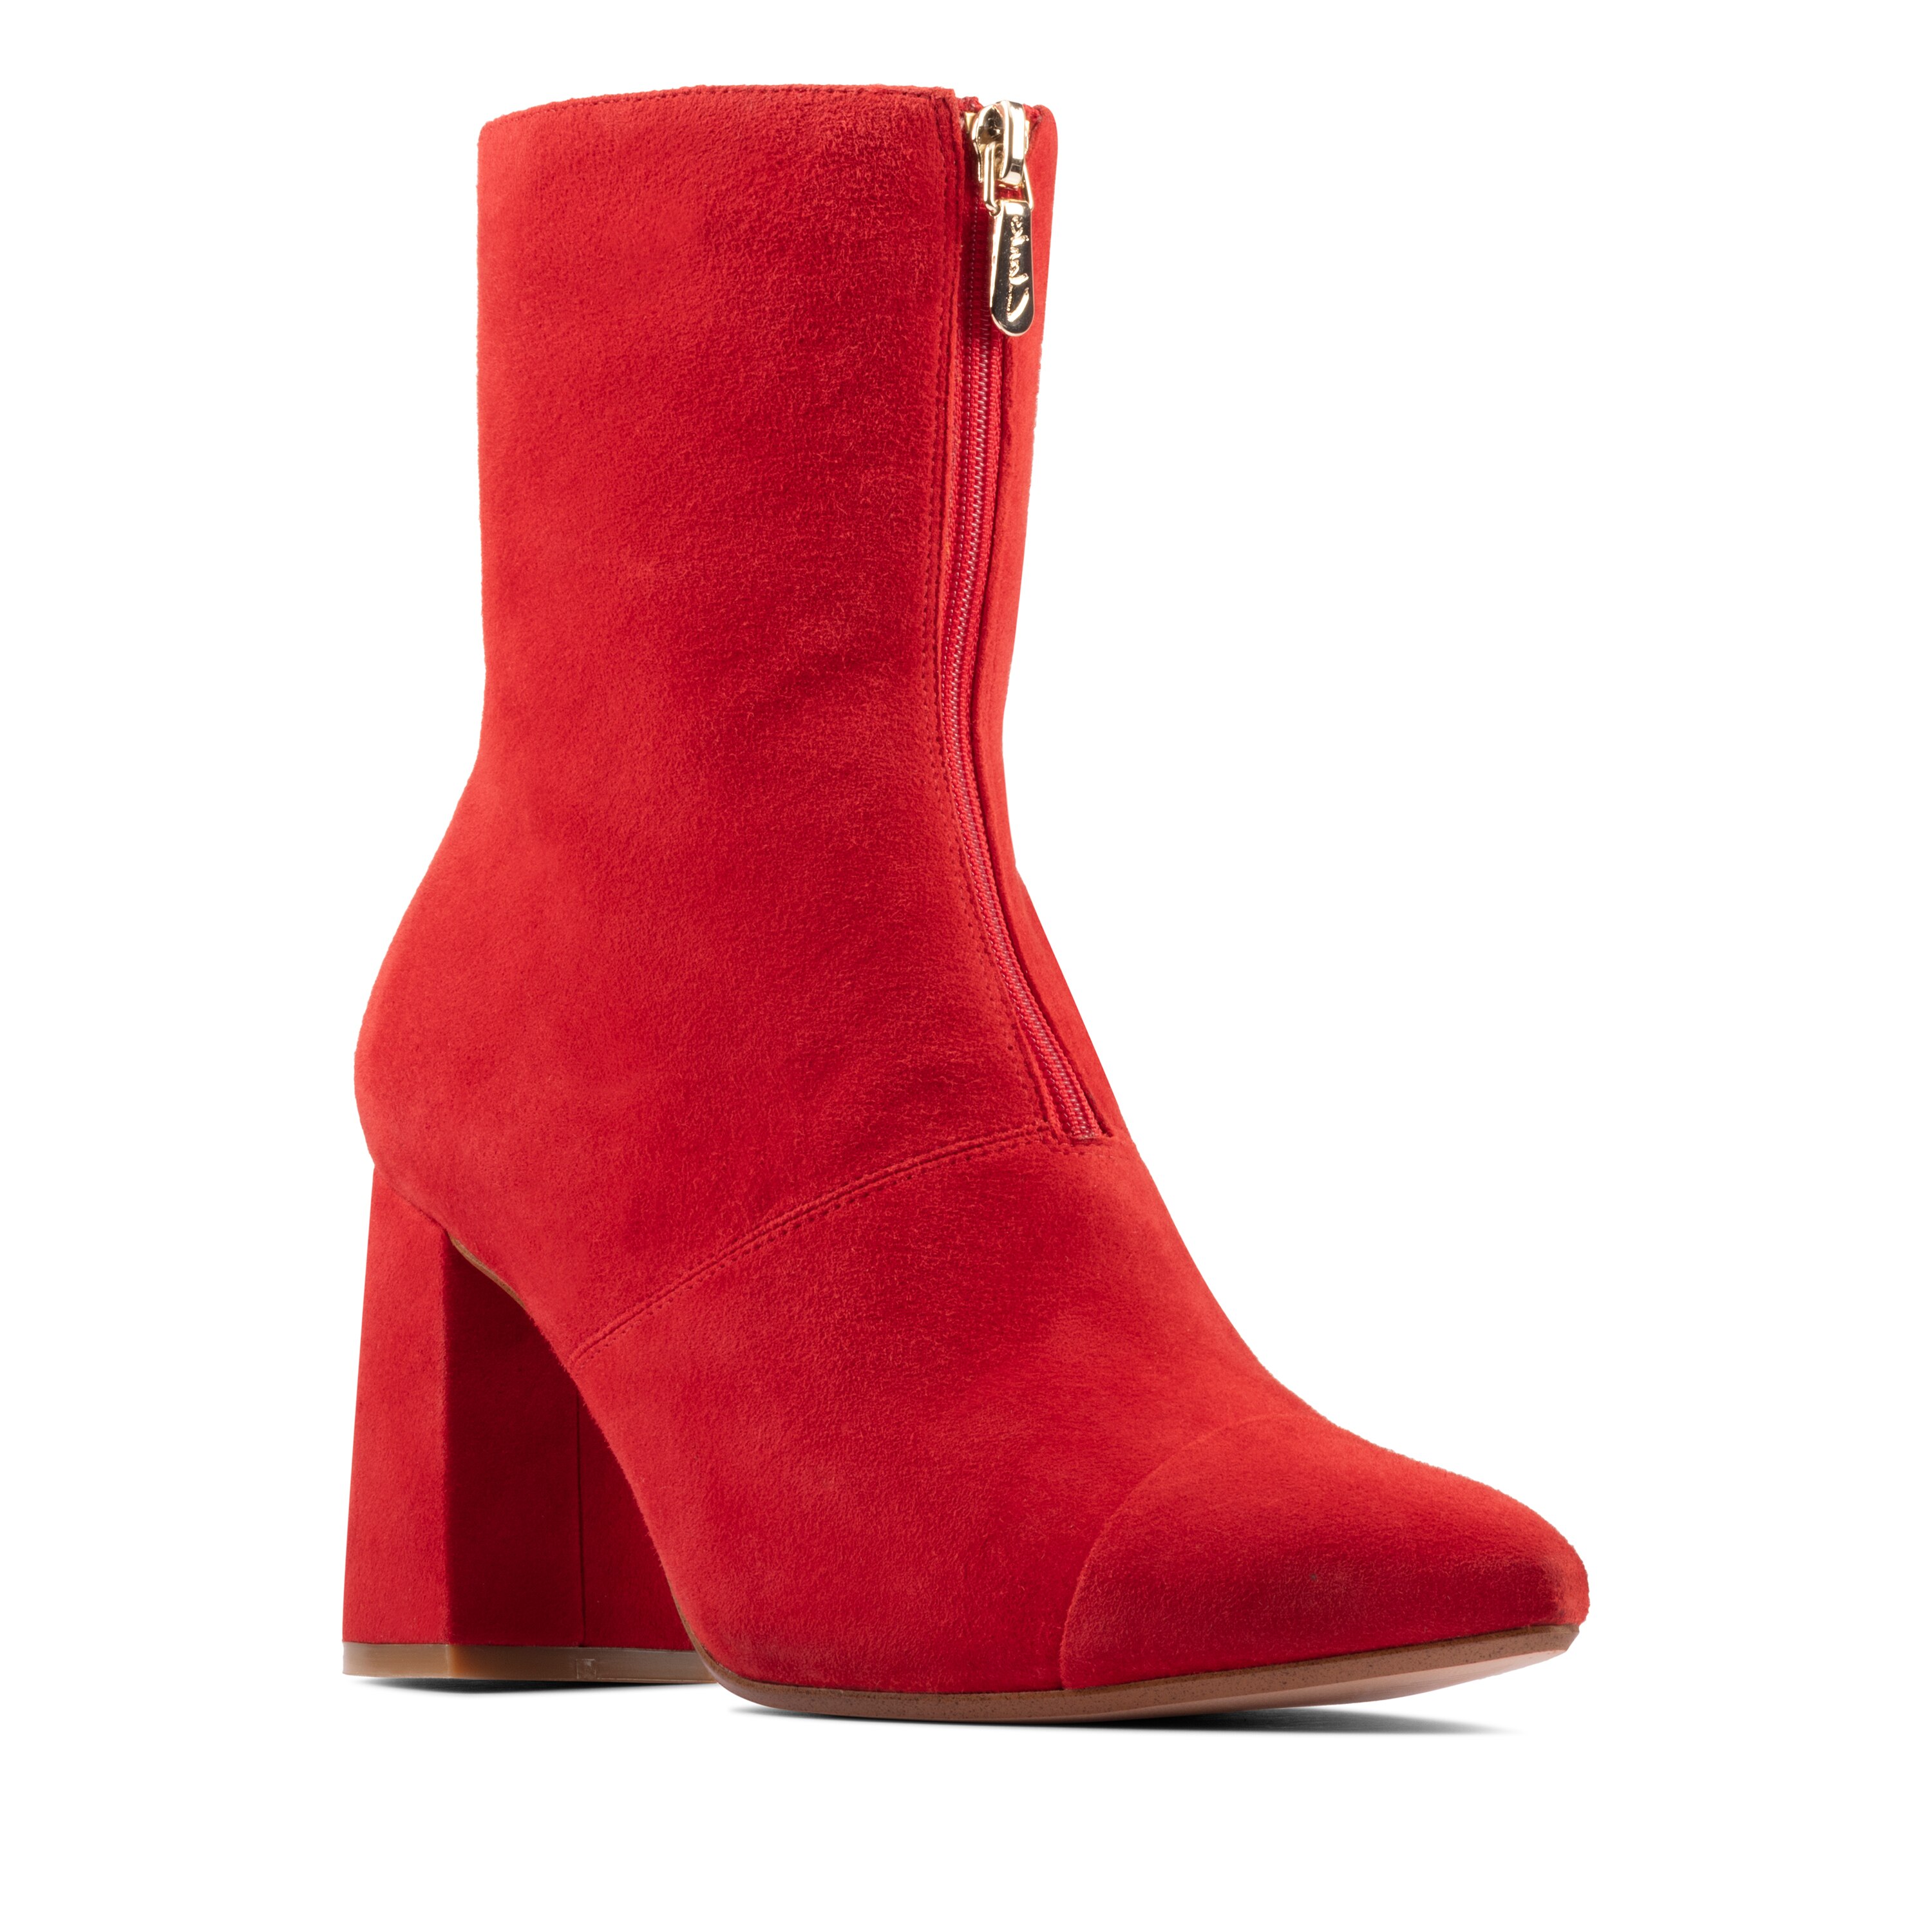 clarks red ankle boots